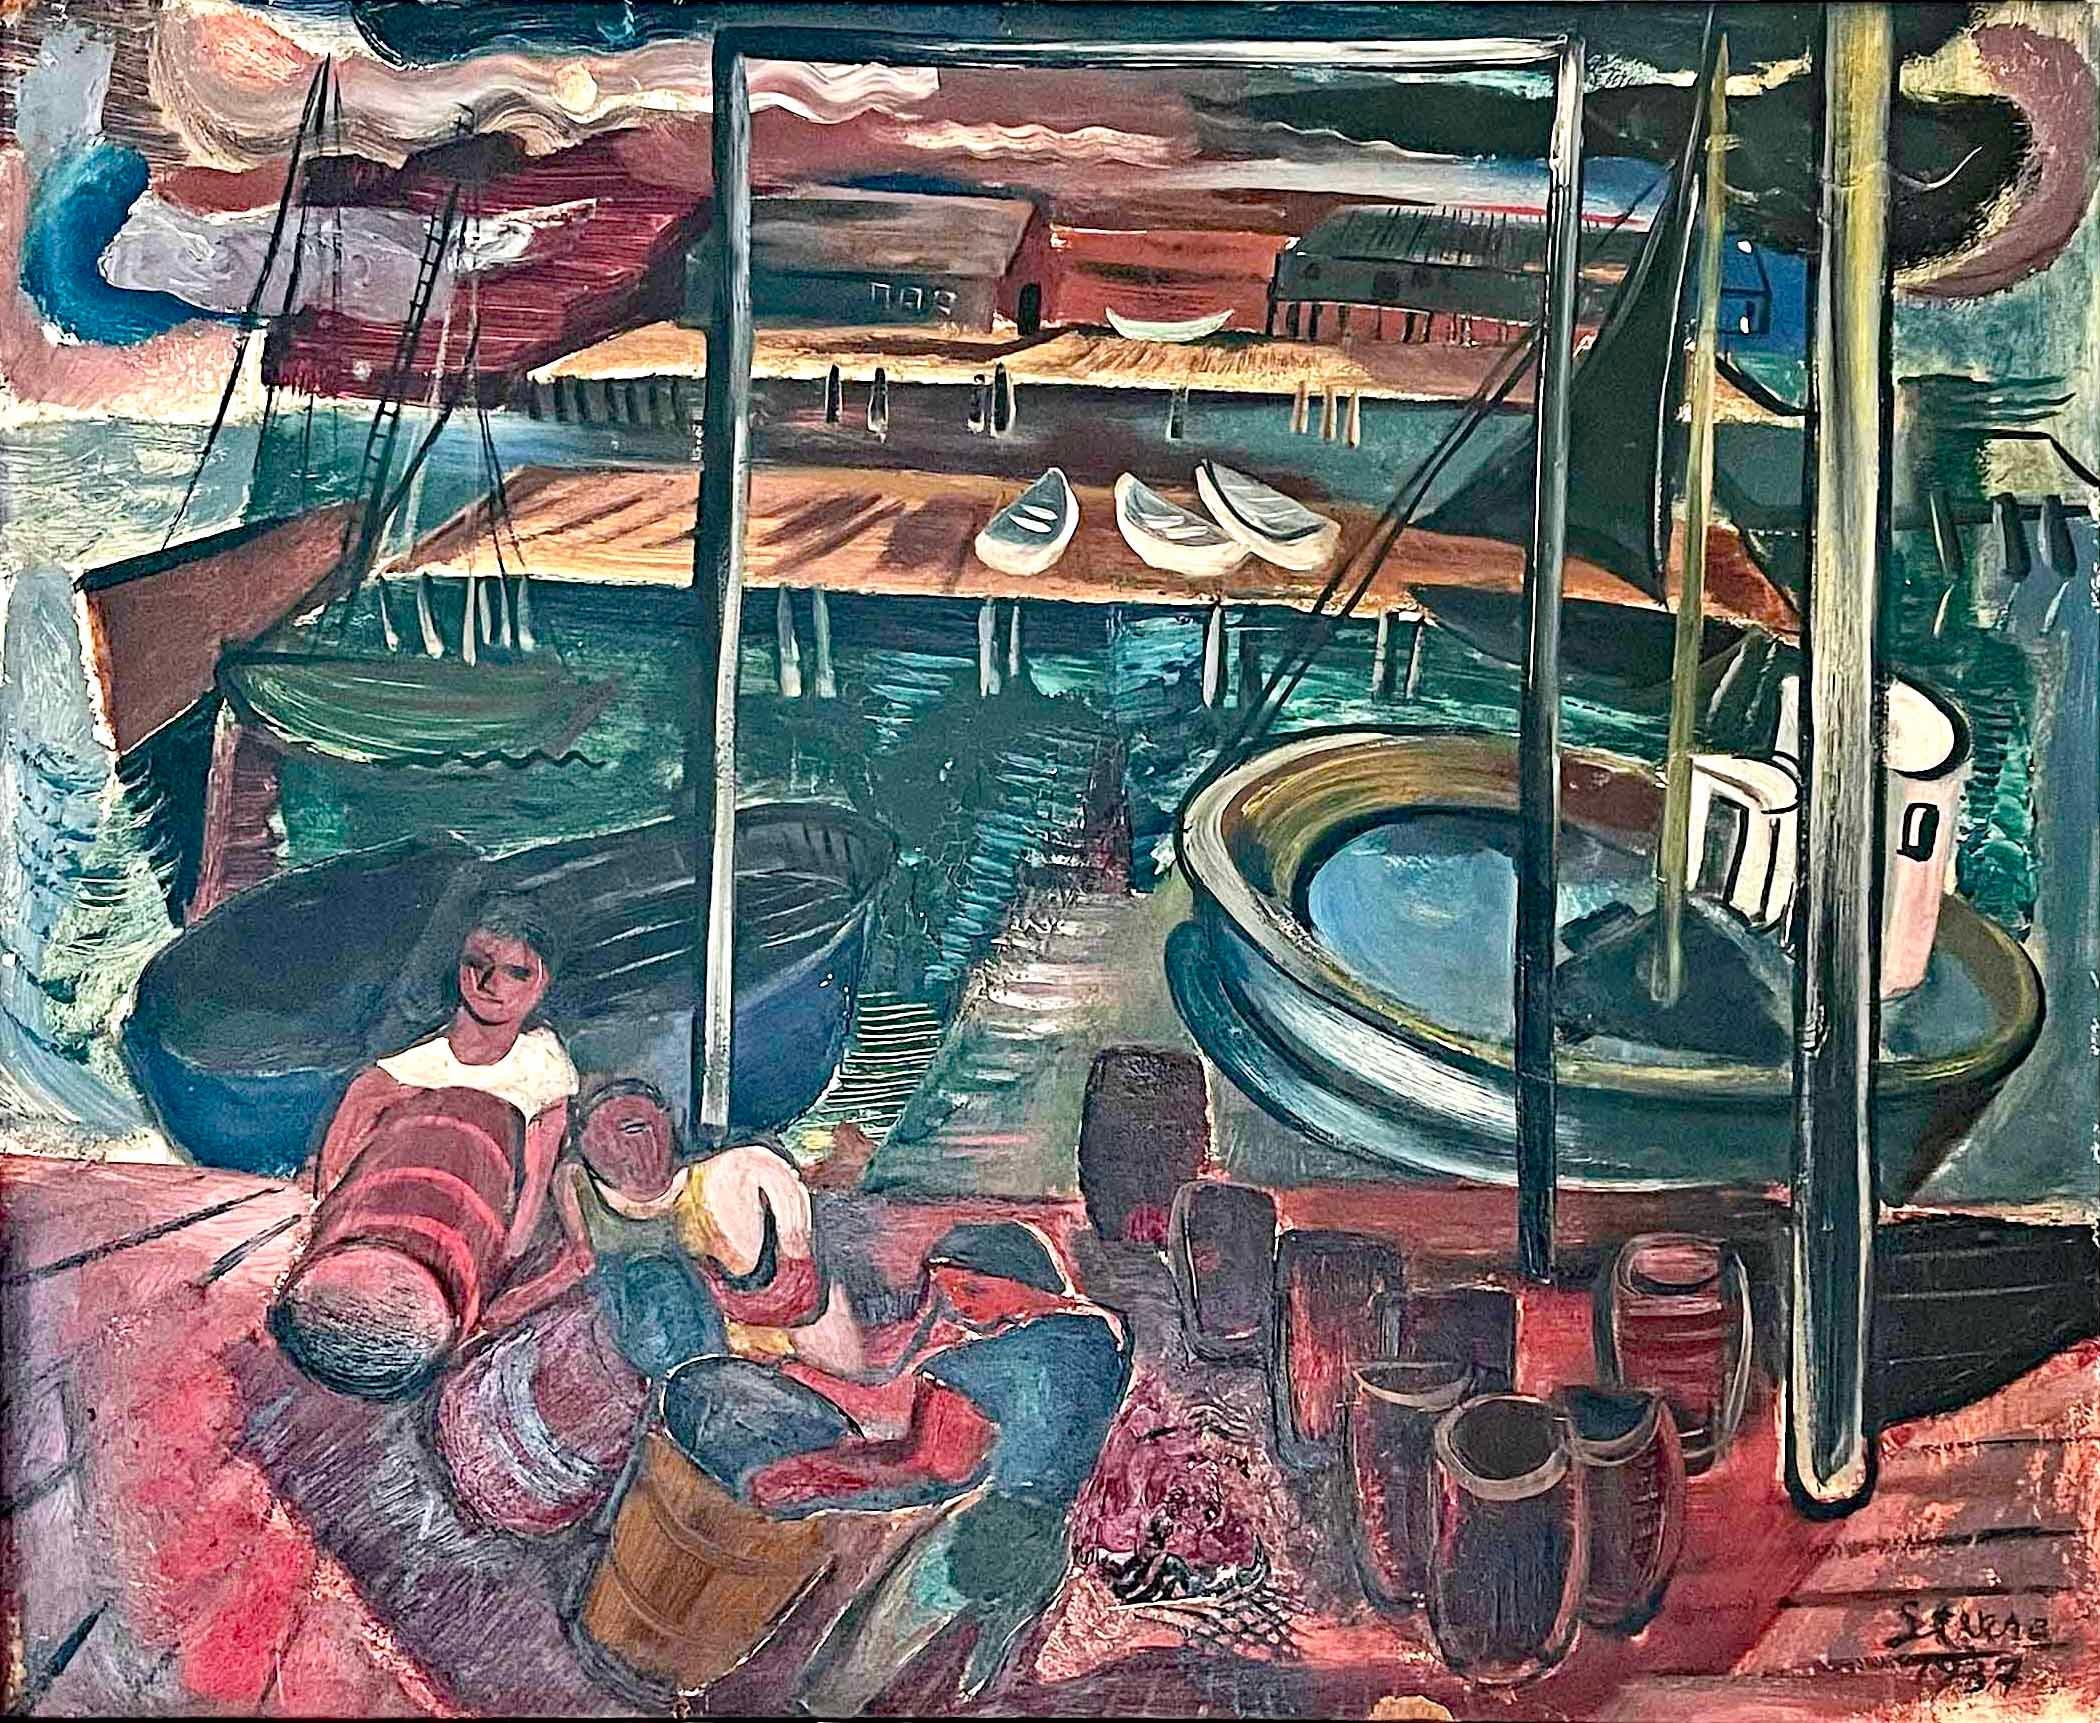 A superb example of WPA-era painting that celebrates the American worker, this dockside scene in Provincetown, Massachusetts by Maurice Sterne depicts several fishermen handling their catch after a day in the waters around Cape Cod, all in a rich,